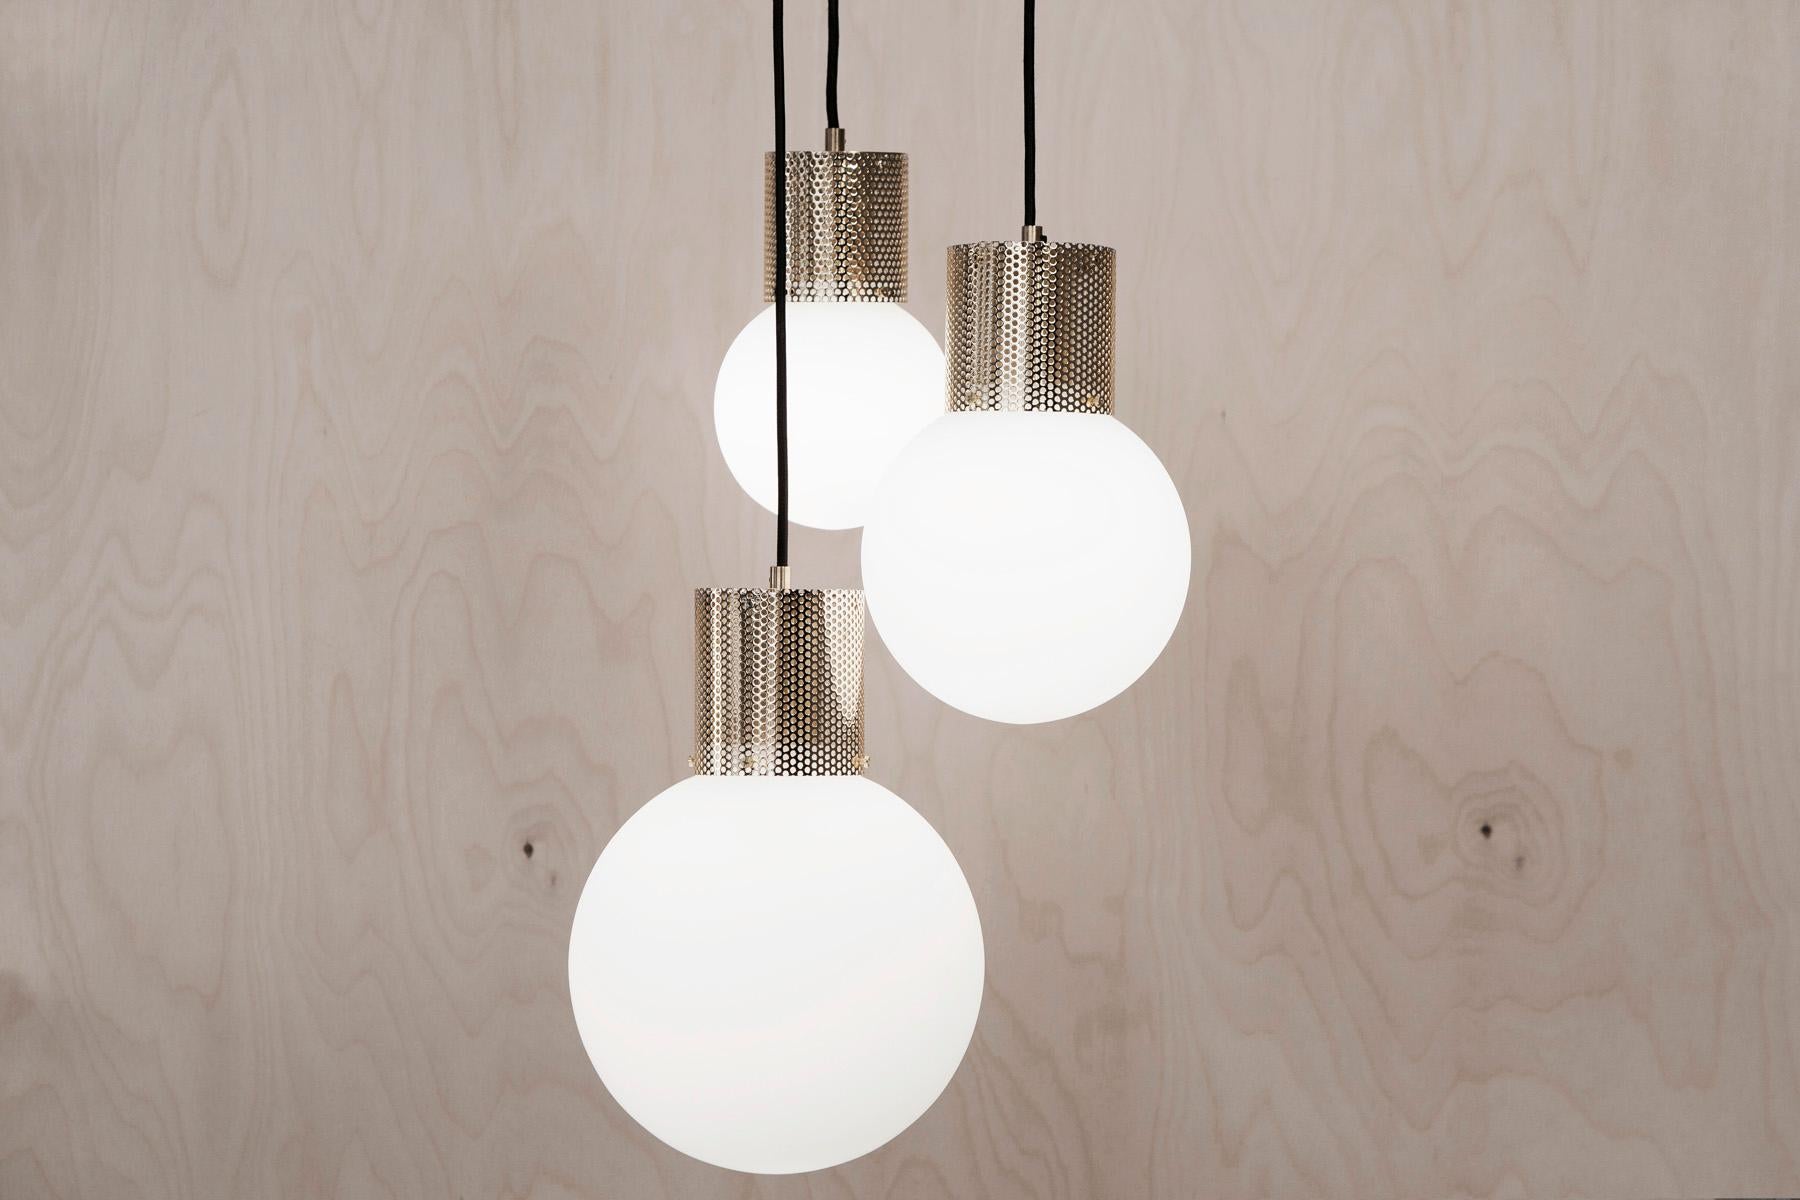 Combining hand blown opal glass with a perforated metal housing, Perf pendant is an elemental and versatile decorative fixture.
Utilizing a low energy LED bulb, Perf pendant is available in 3 sizes and 3 finishes, with custom colors available.
This